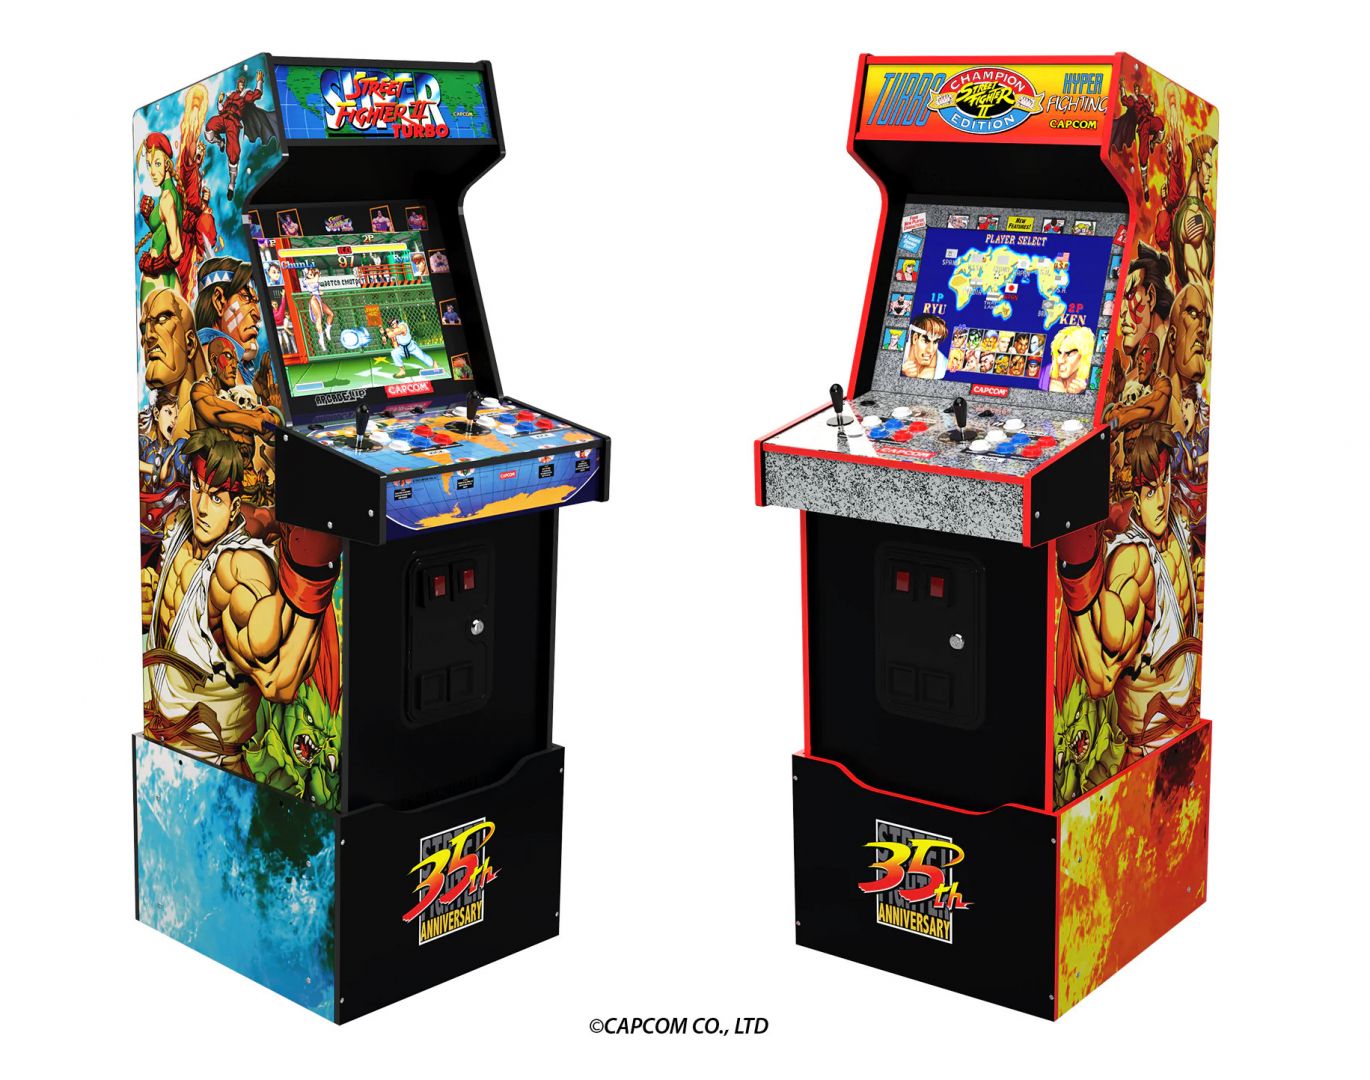 Co-Optimus - News - Arcade1Up Announces New Capcom Legacy Arcade Cabinets  Filled with Co-op Goodness